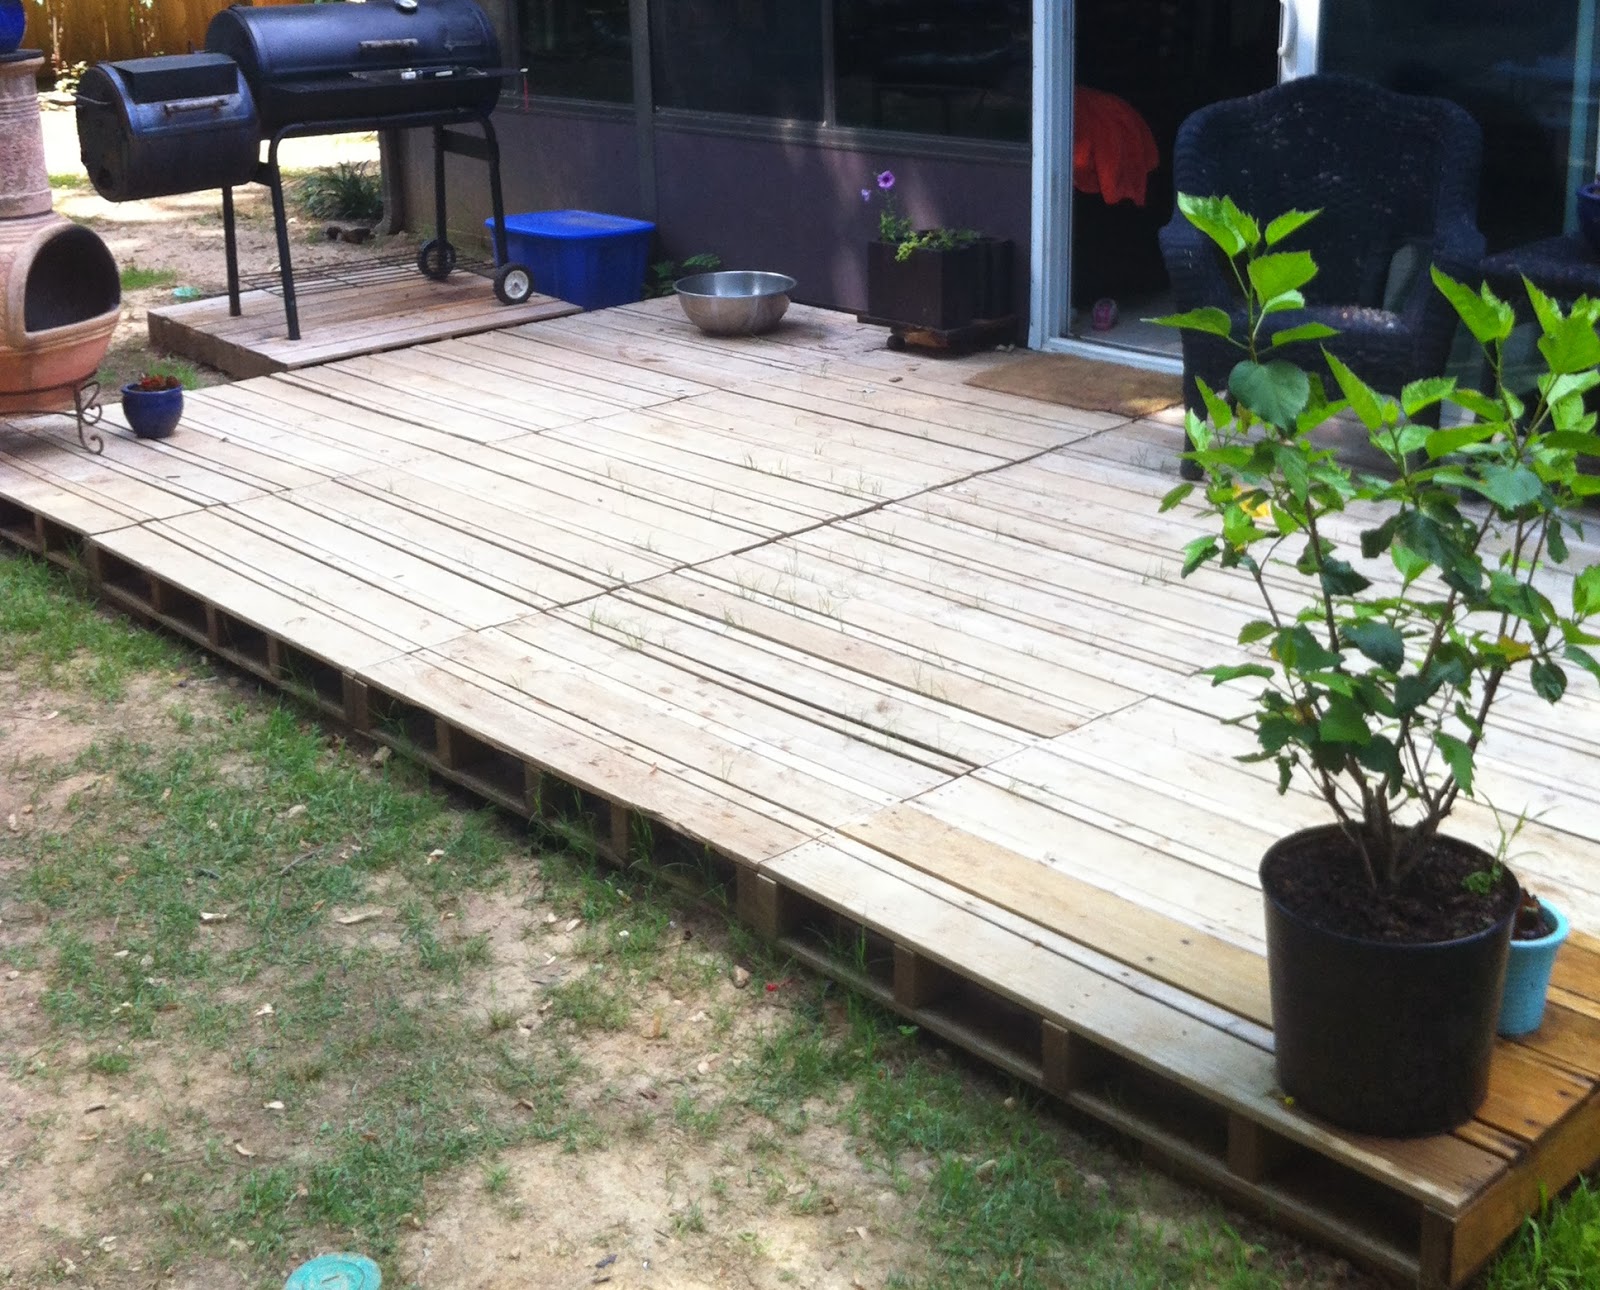 The Crafty Life: Pallet Deck